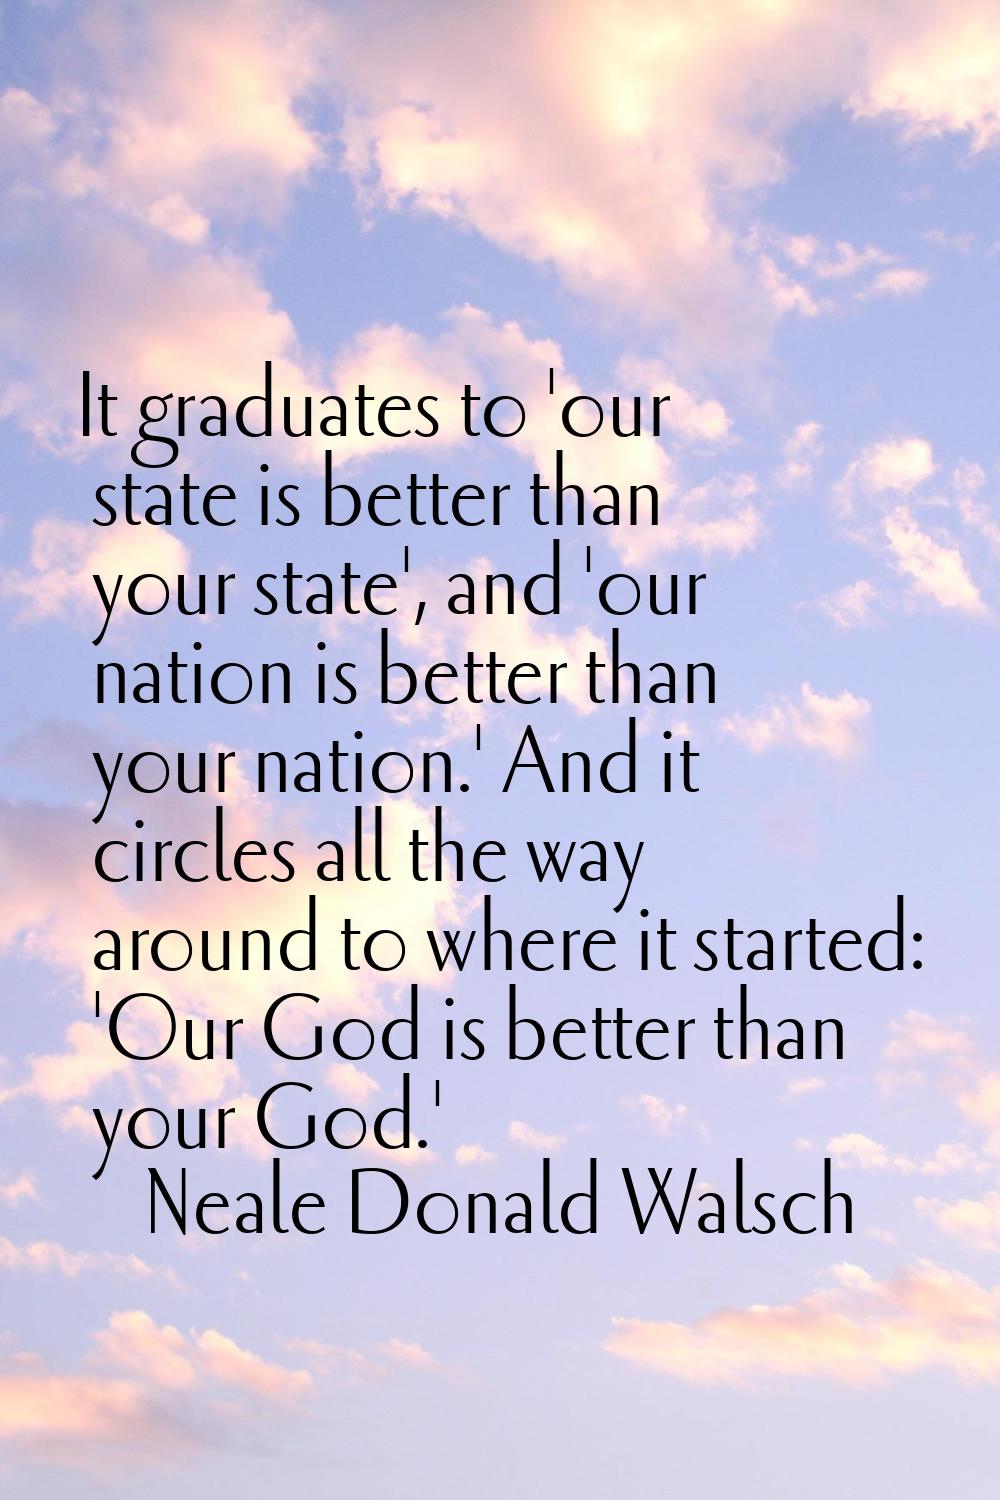 It graduates to 'our state is better than your state', and 'our nation is better than your nation.'